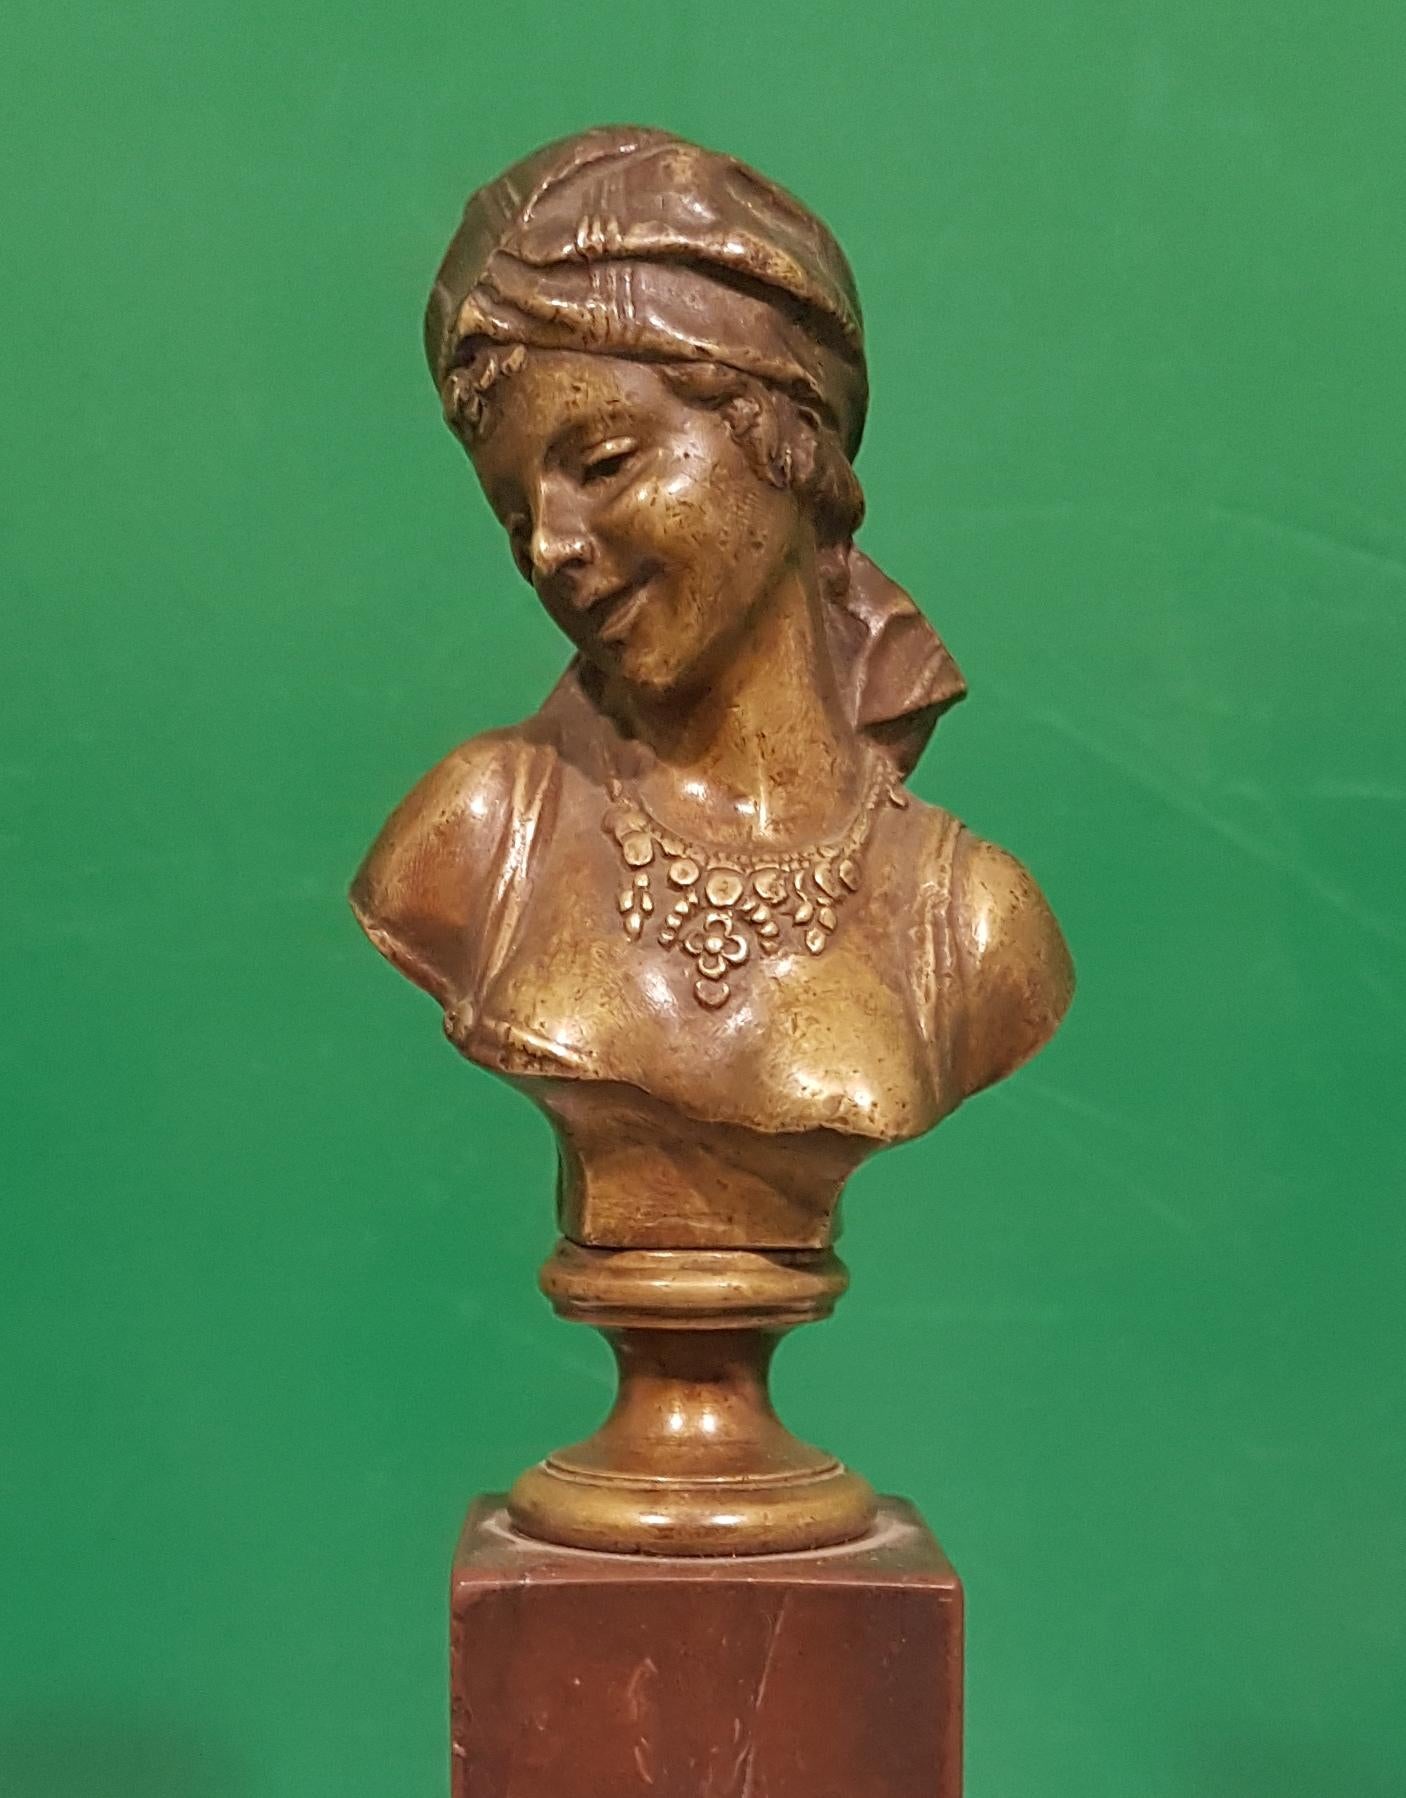 Bronze Bust with red French marble base, end of 19th century.
Provenience: France

This artwork is shipped from Italy. Under existing legislation, any artwork in Italy created over 70 years ago by an artist who has died requires a licence for